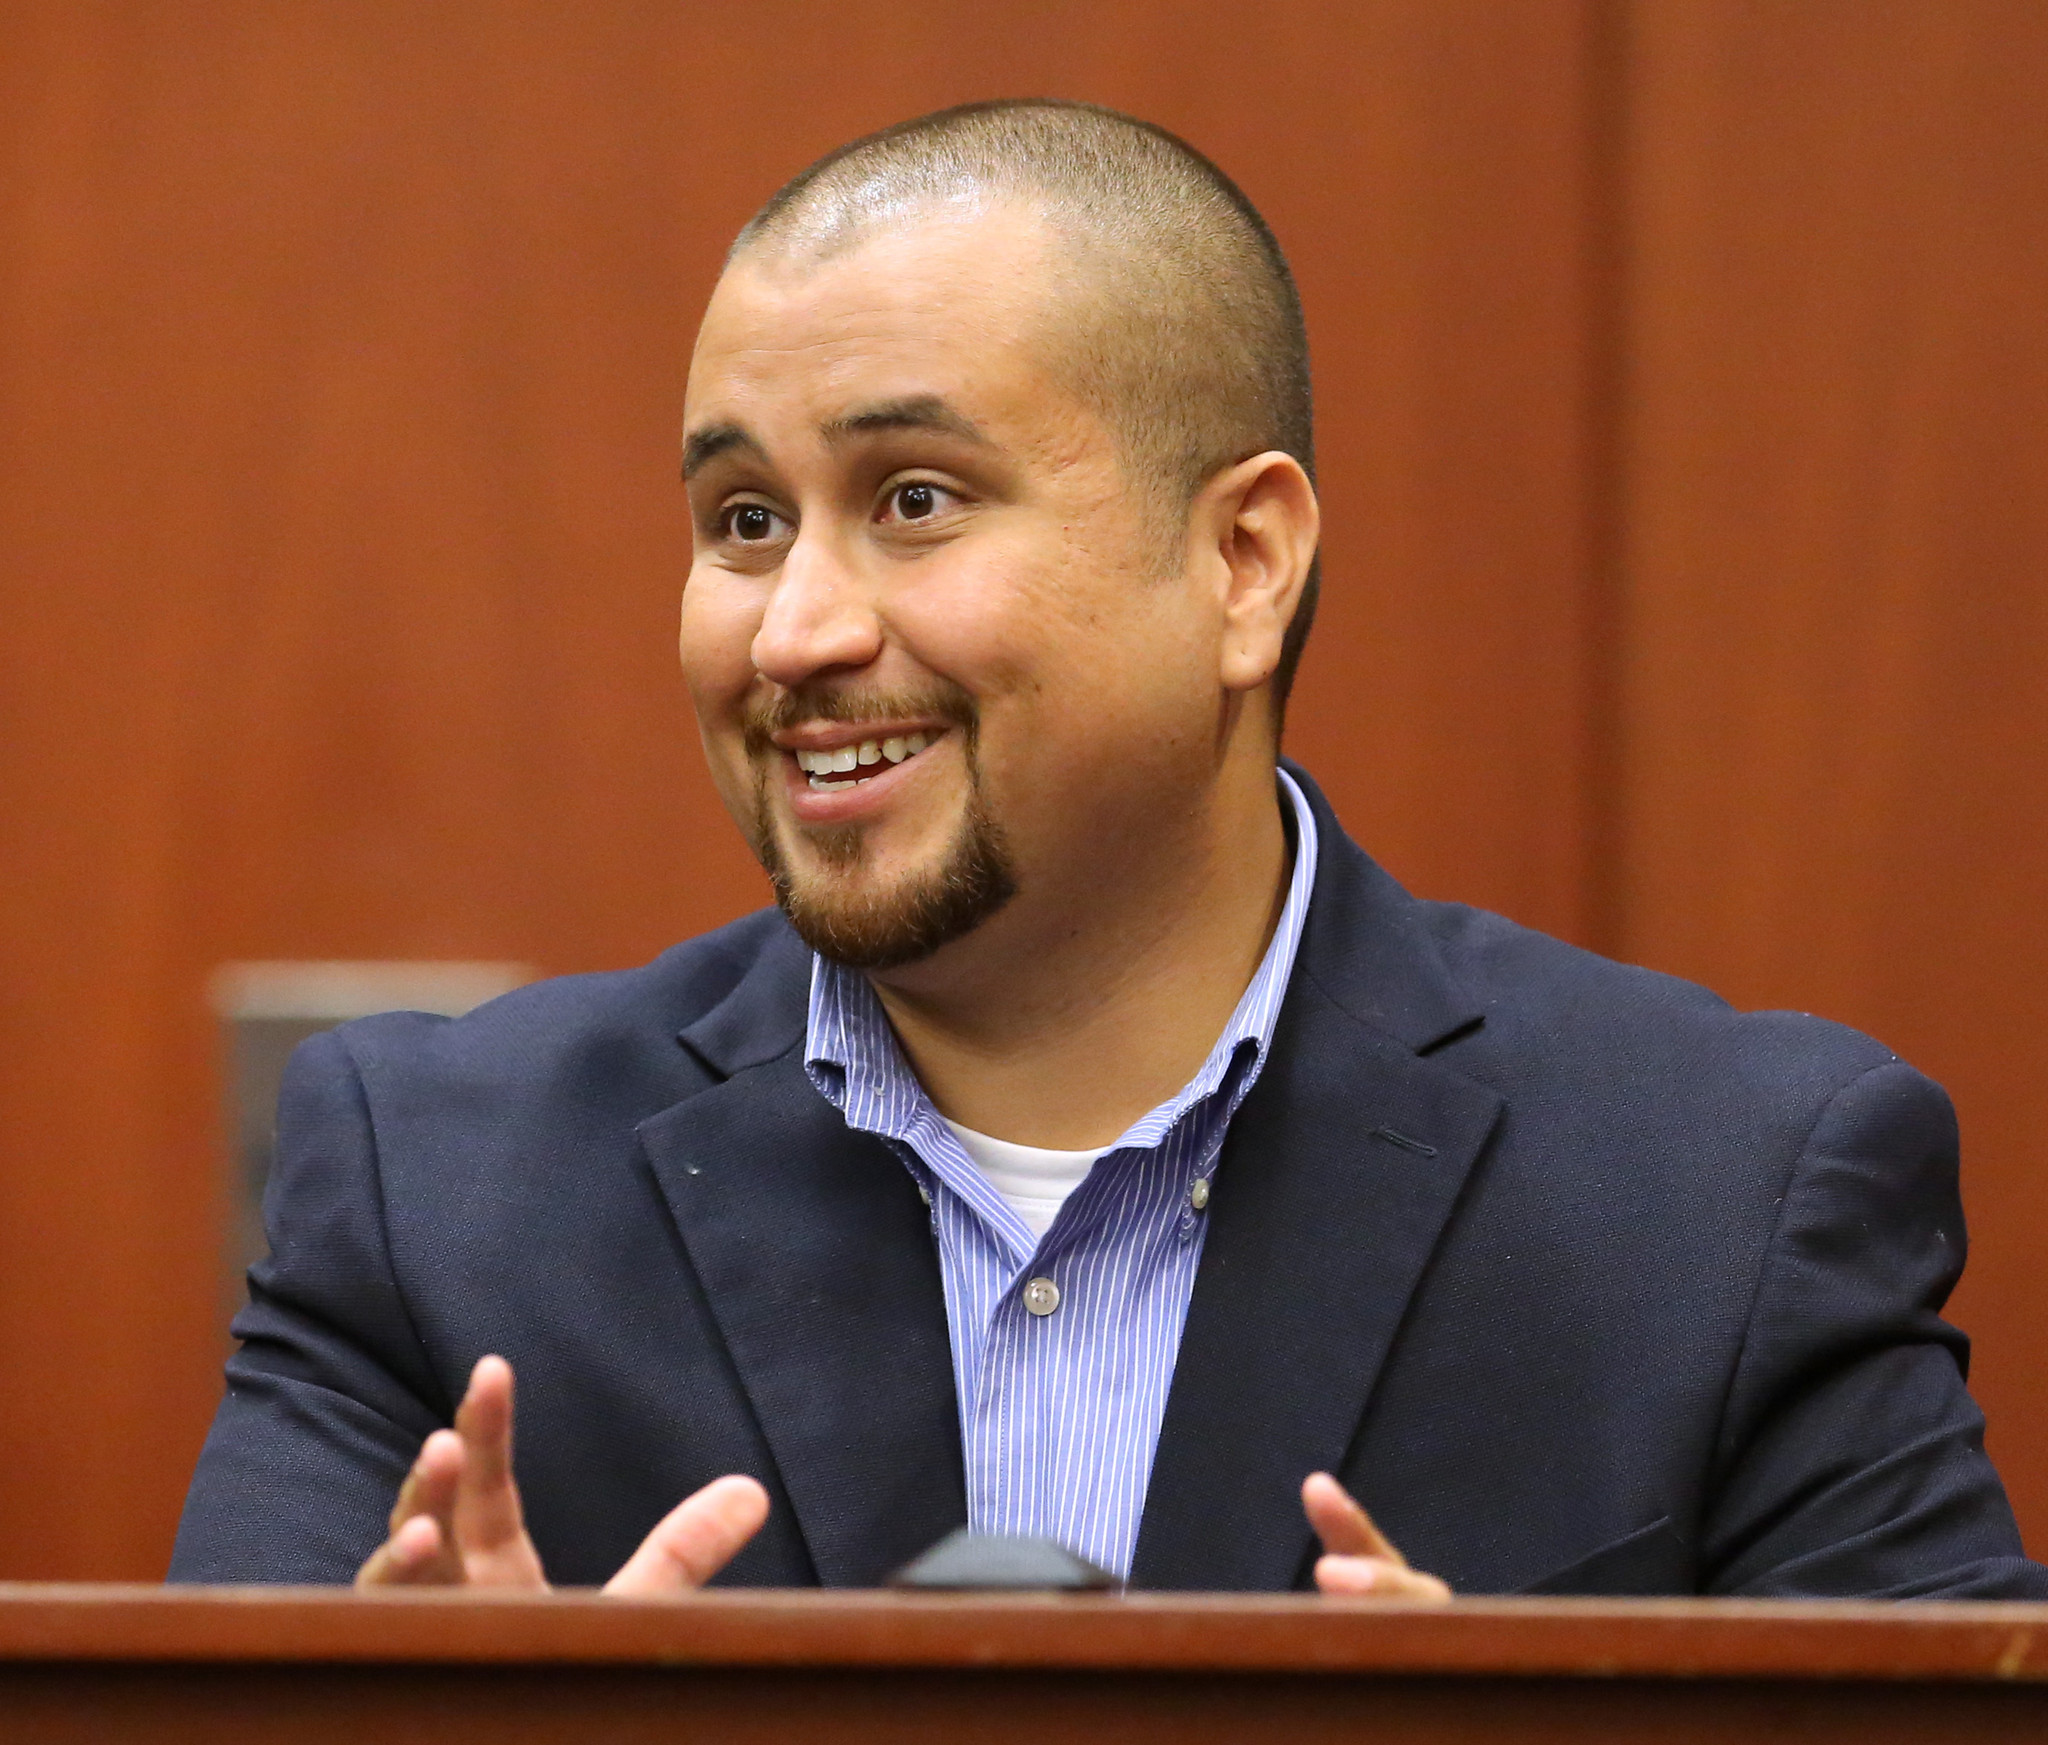 George Zimmerman is no 'good guy with a gun' - Chicago Tribune